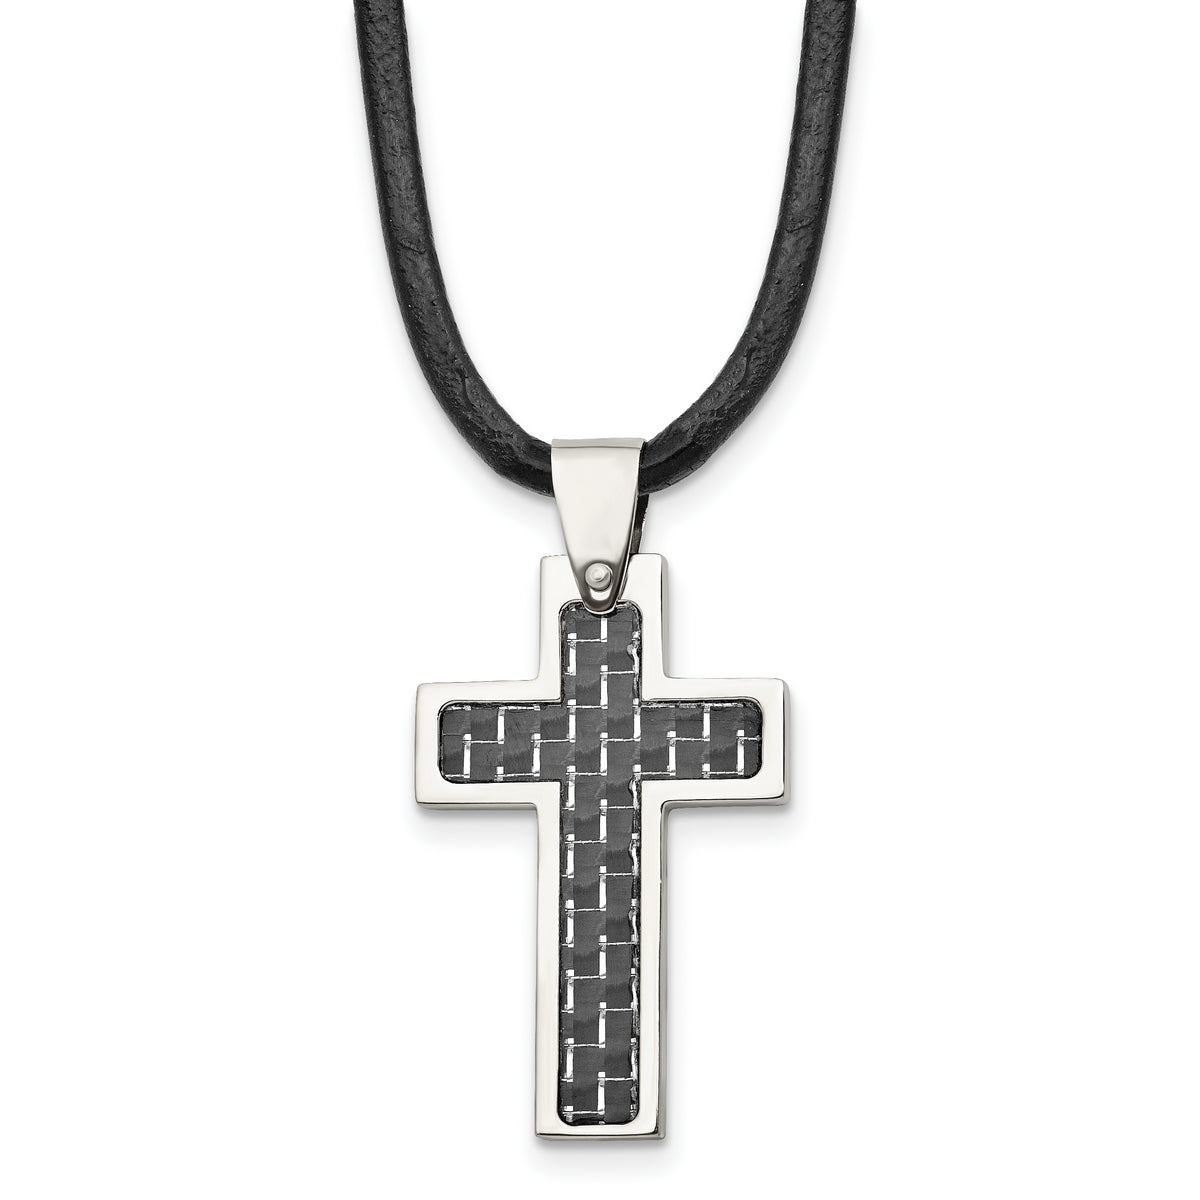 Chisel Stainless Steel Polished with Black Carbon Fiber Inlay Cross Pendant on an 18 inch Leather Cord Necklace